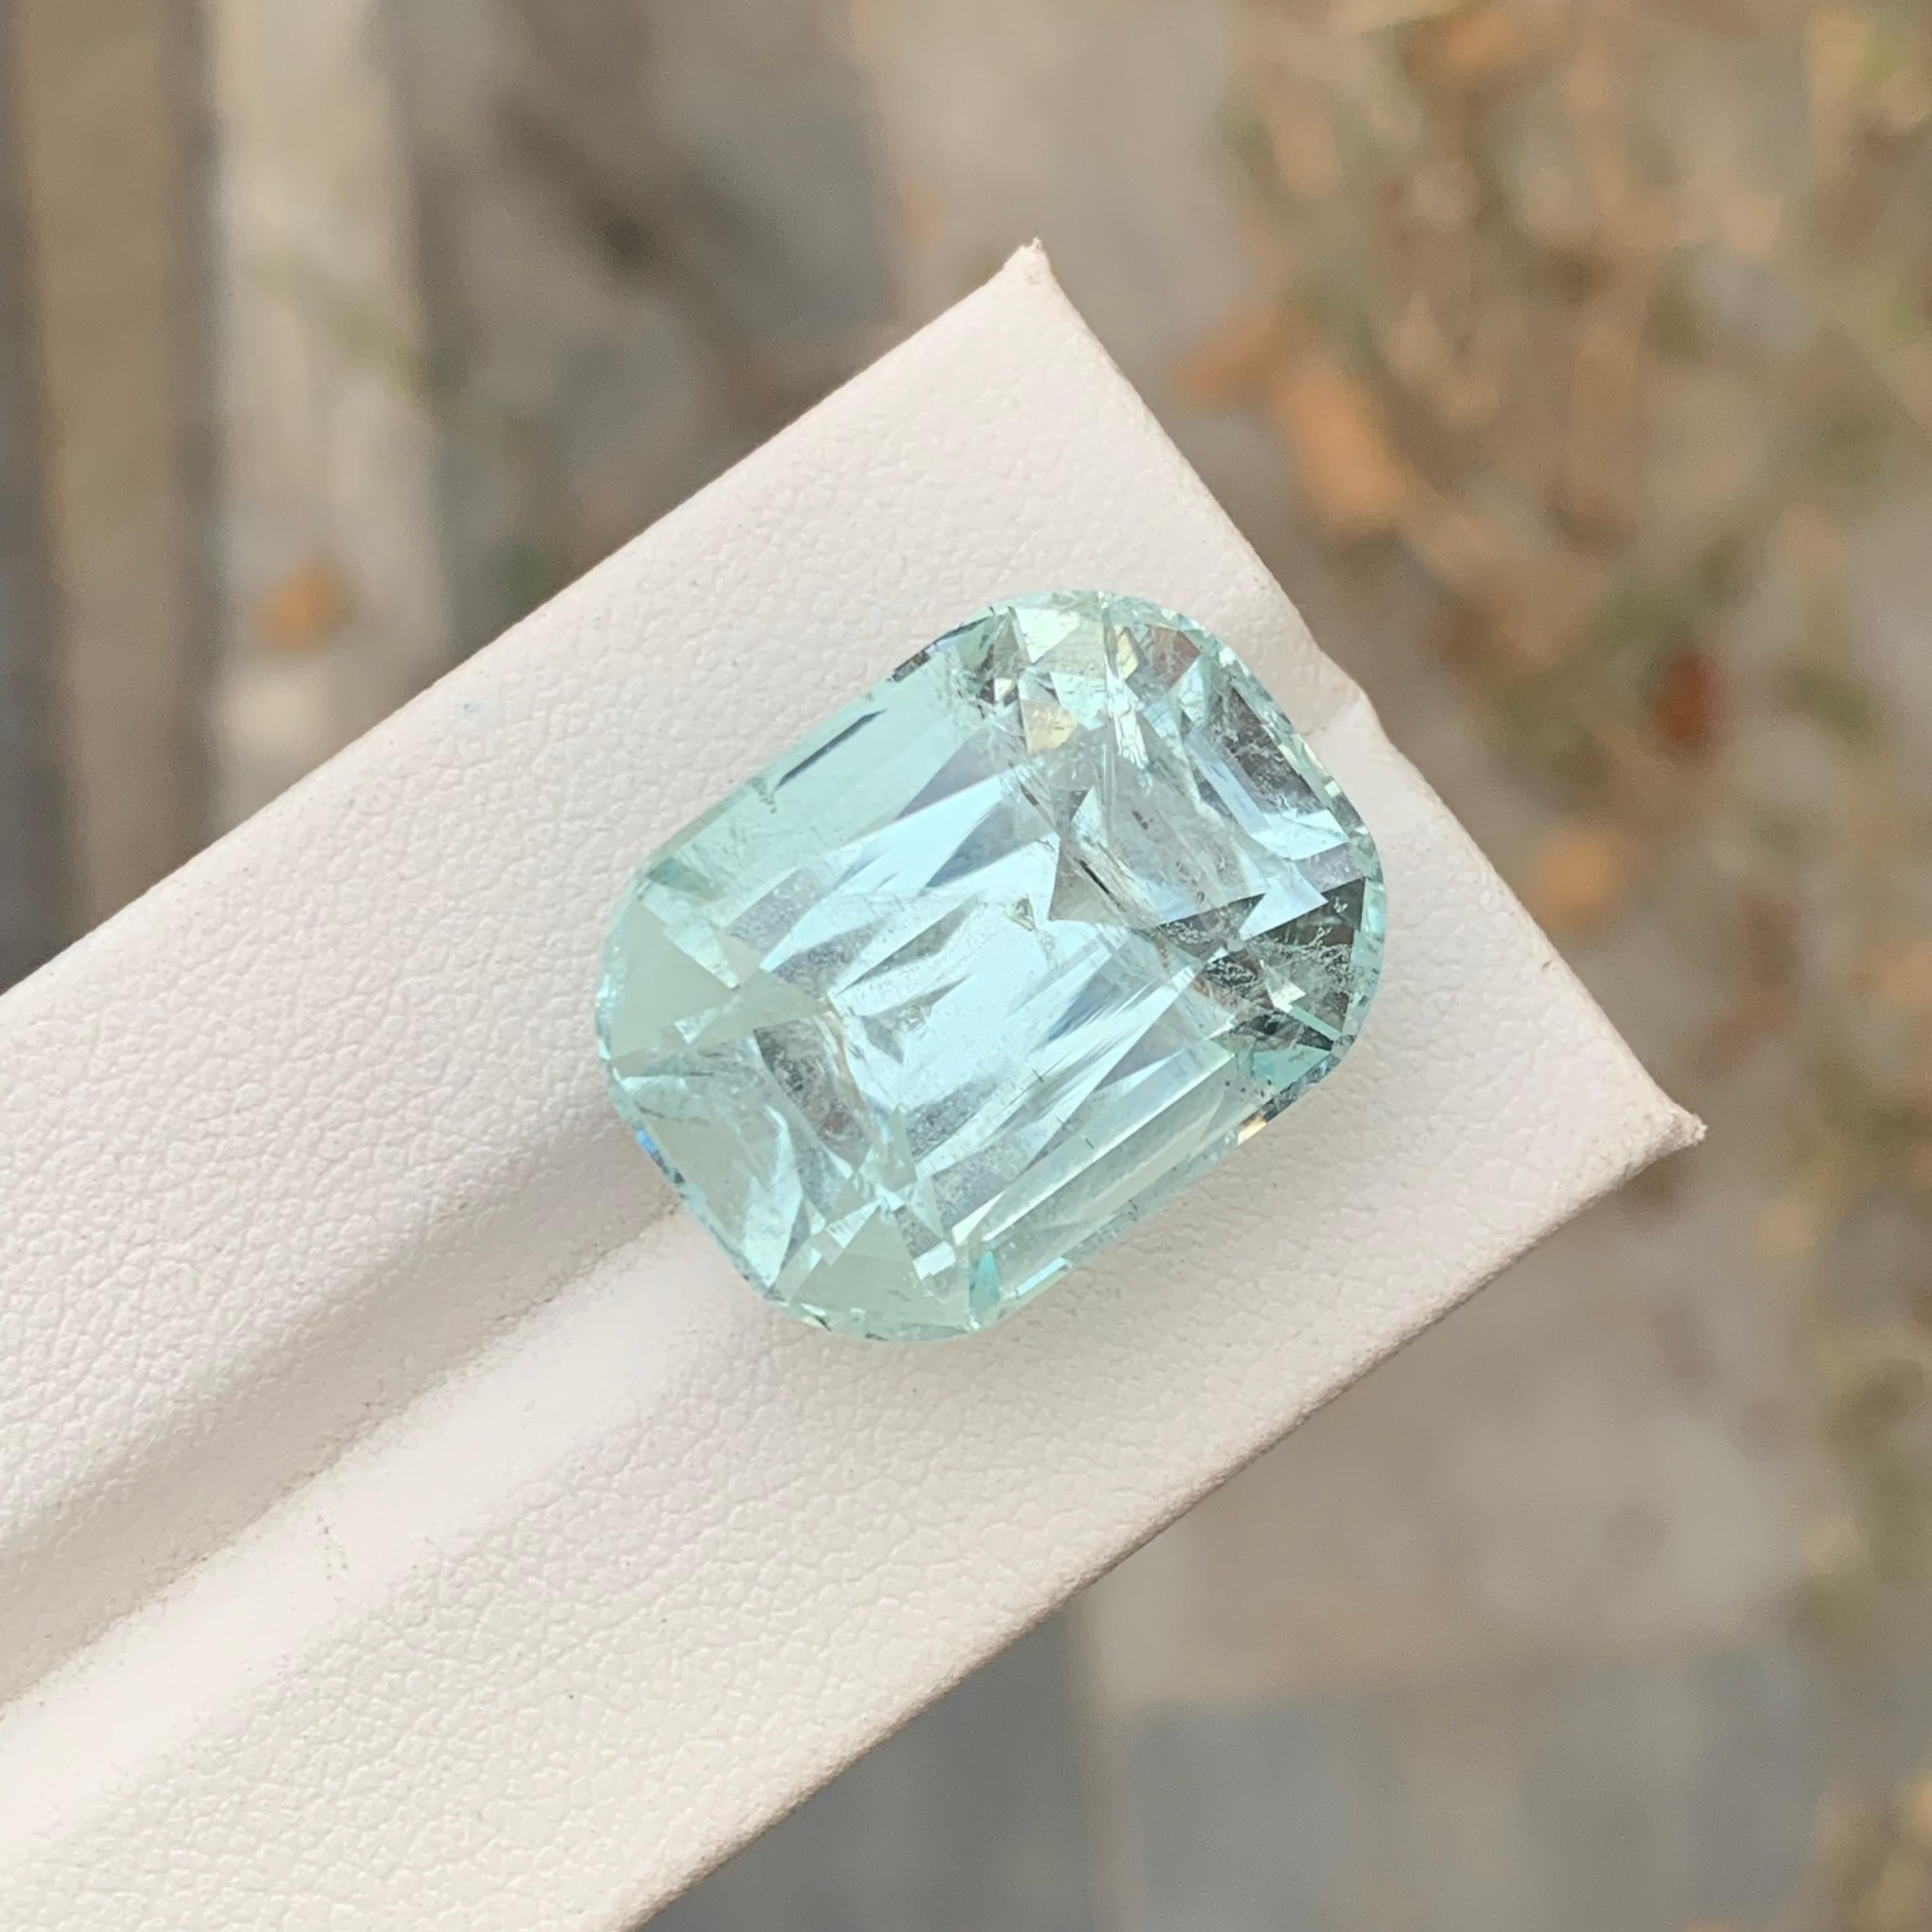 Loose Aquamarine 
Weight: 29.75 Carats 
Dimension: 21x16x13 Mm
Origin: Shigar Valley Pakistan 
Shape: Cushion
Color: Light Seafoam
Treatment: Non / Natural 
Aquamarine is a mesmerizing gemstone known for its captivating blue-green hue reminiscent of